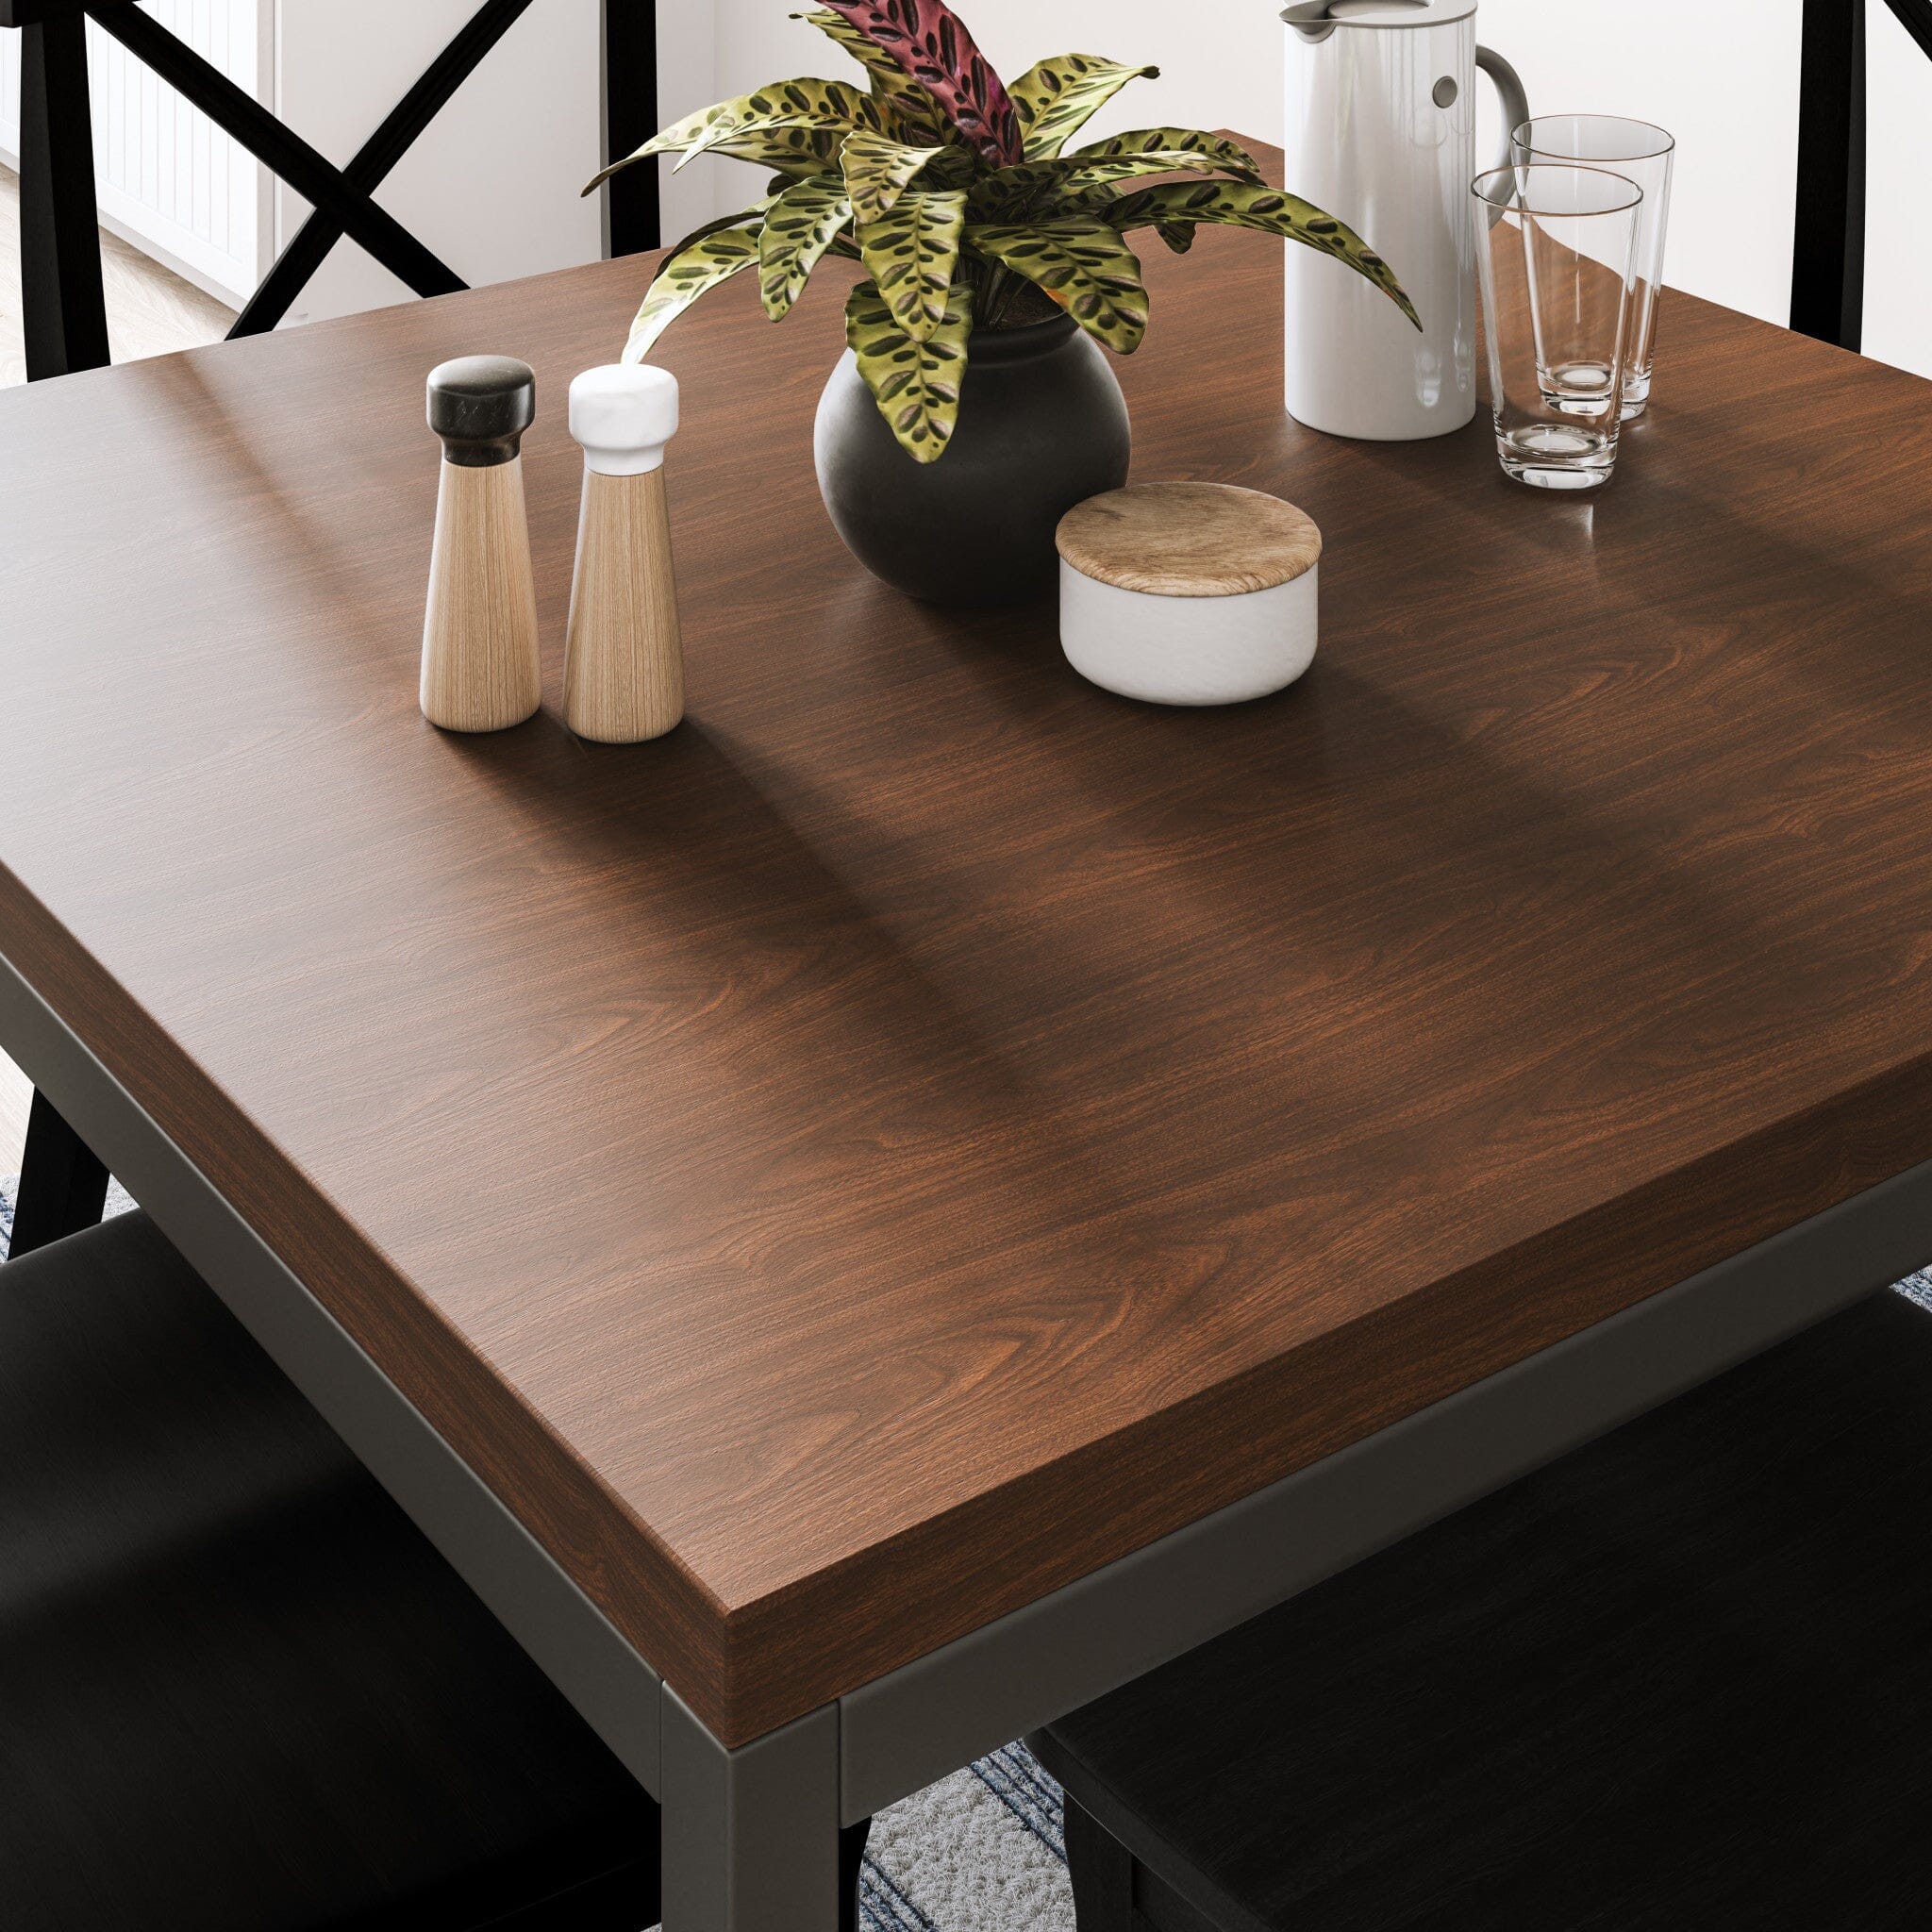 Modern & Contemporary Square Table By Merge Dining Table & Chairs Merge